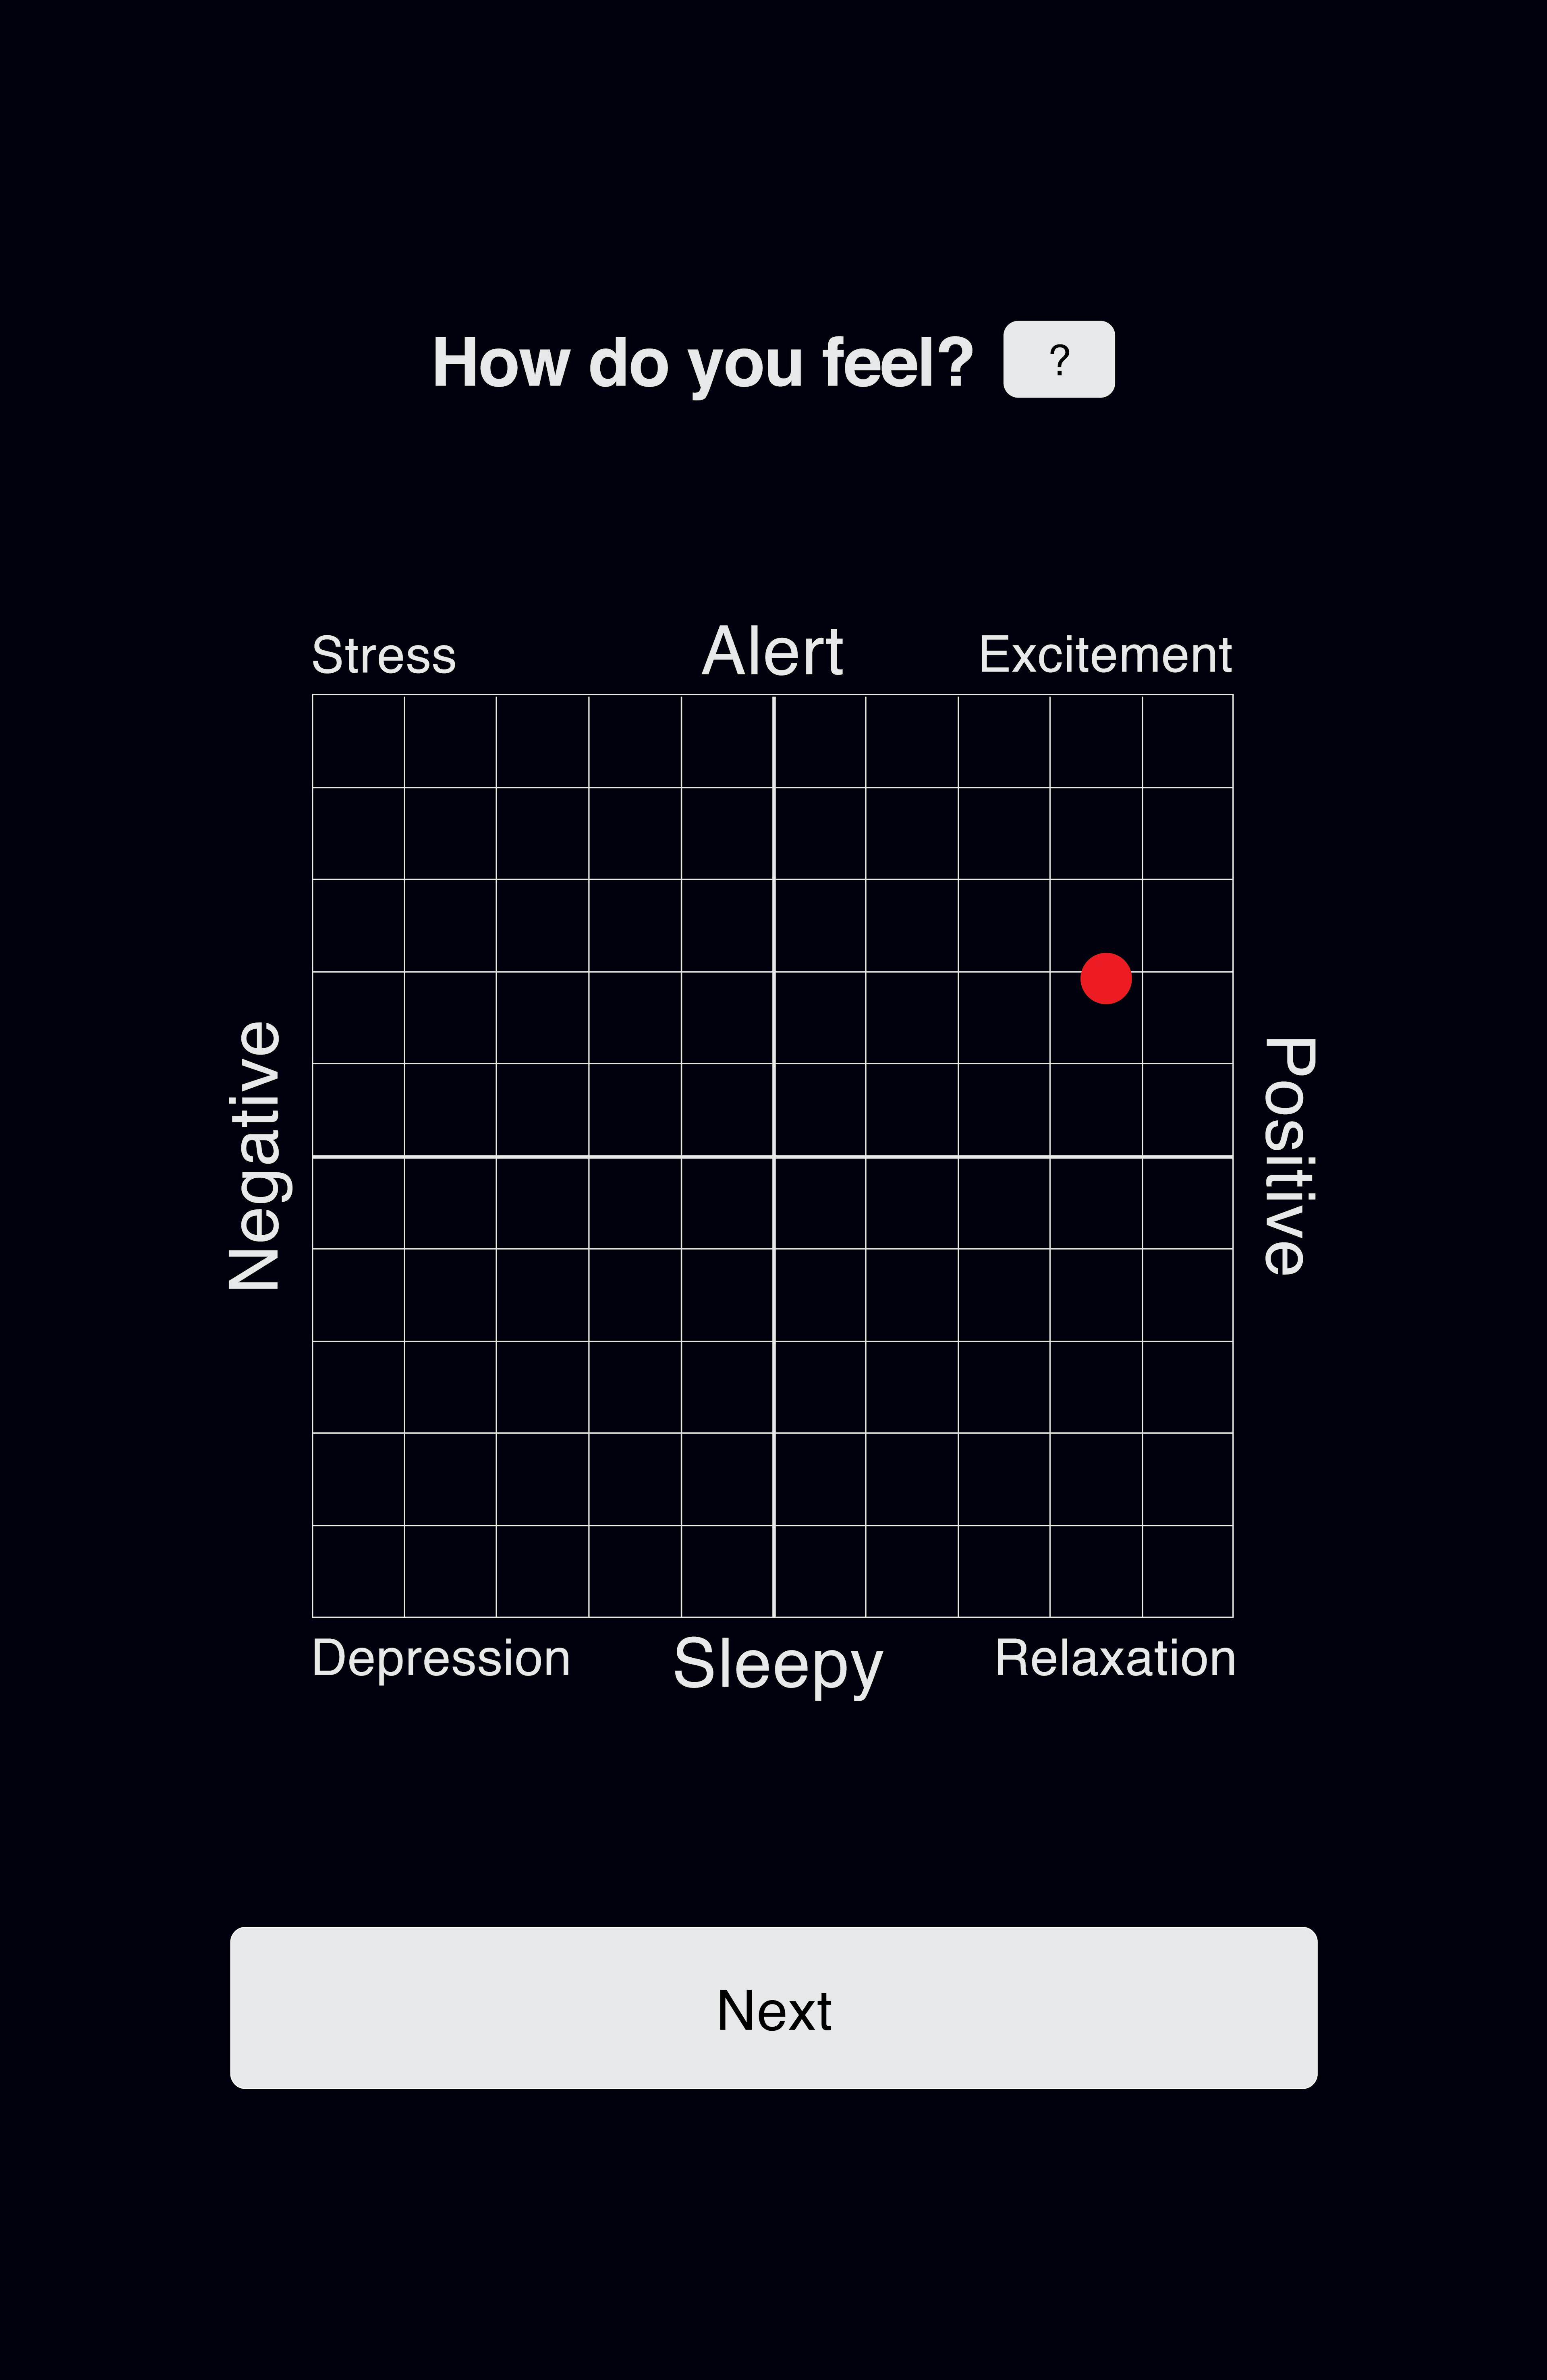 A white graph on a black background with a heading that reads "How do you feel?" A "Next" button is beneath the graph.